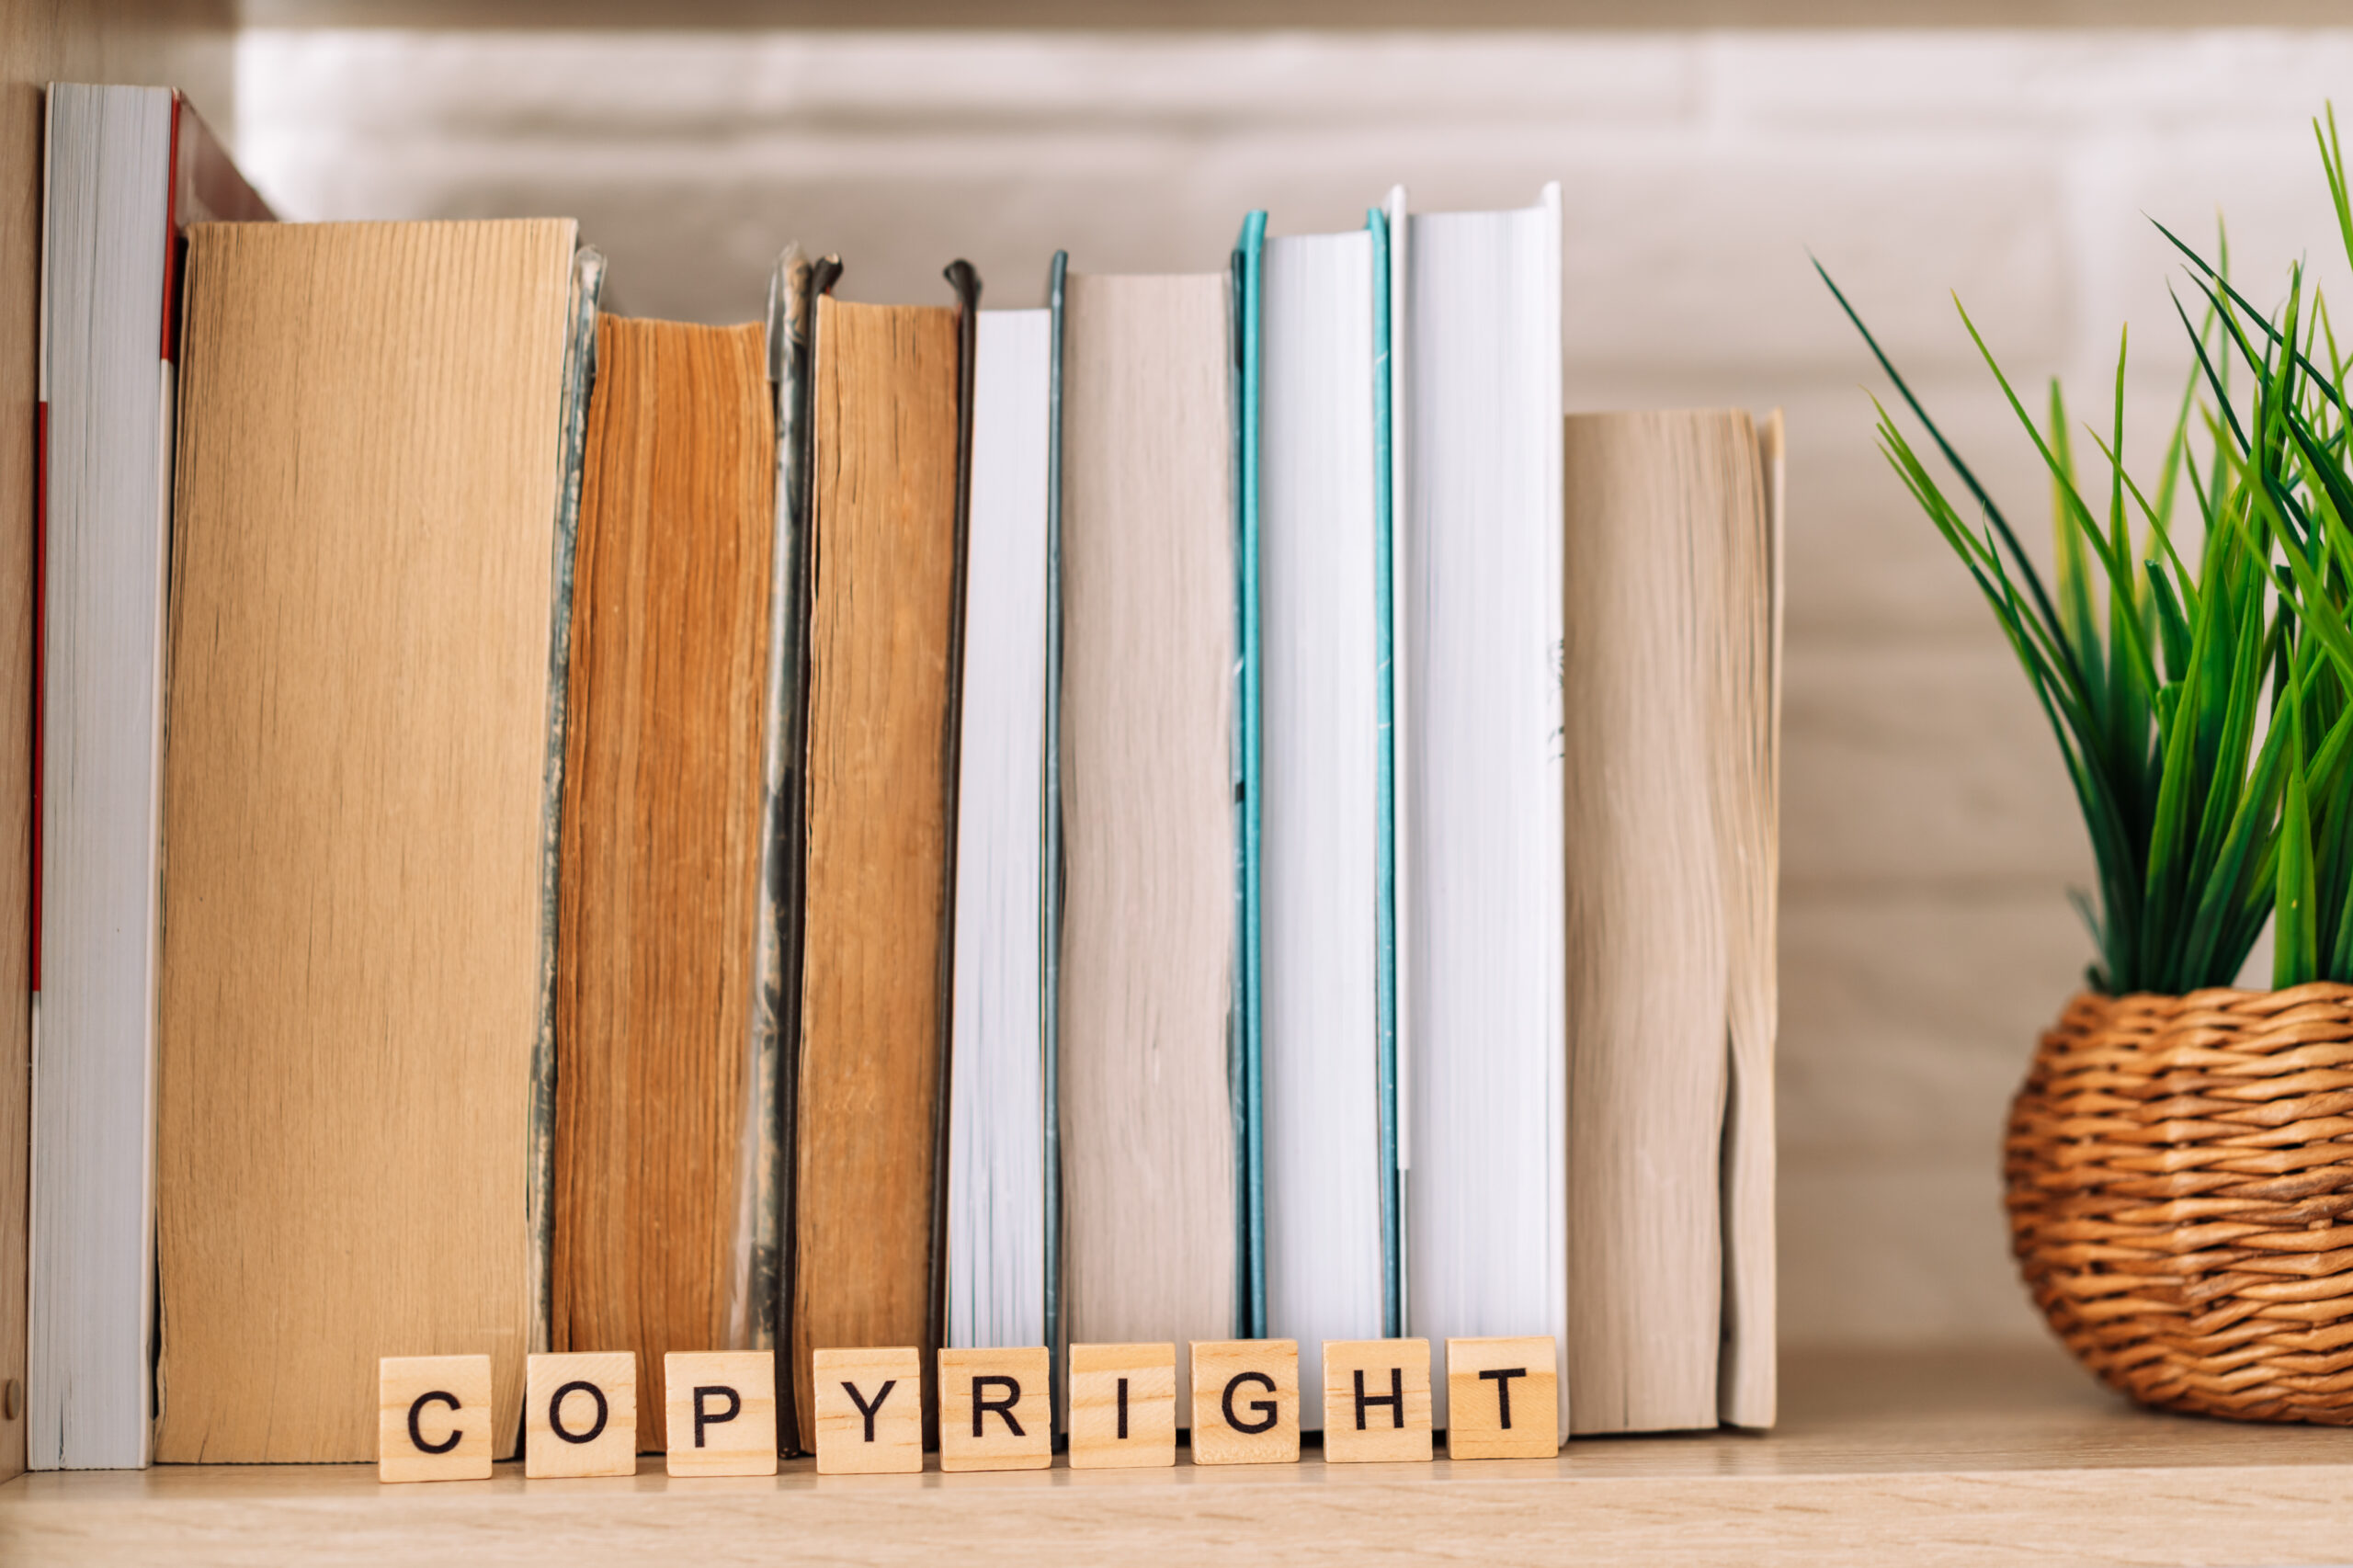 Word copyright made of letters in front of books